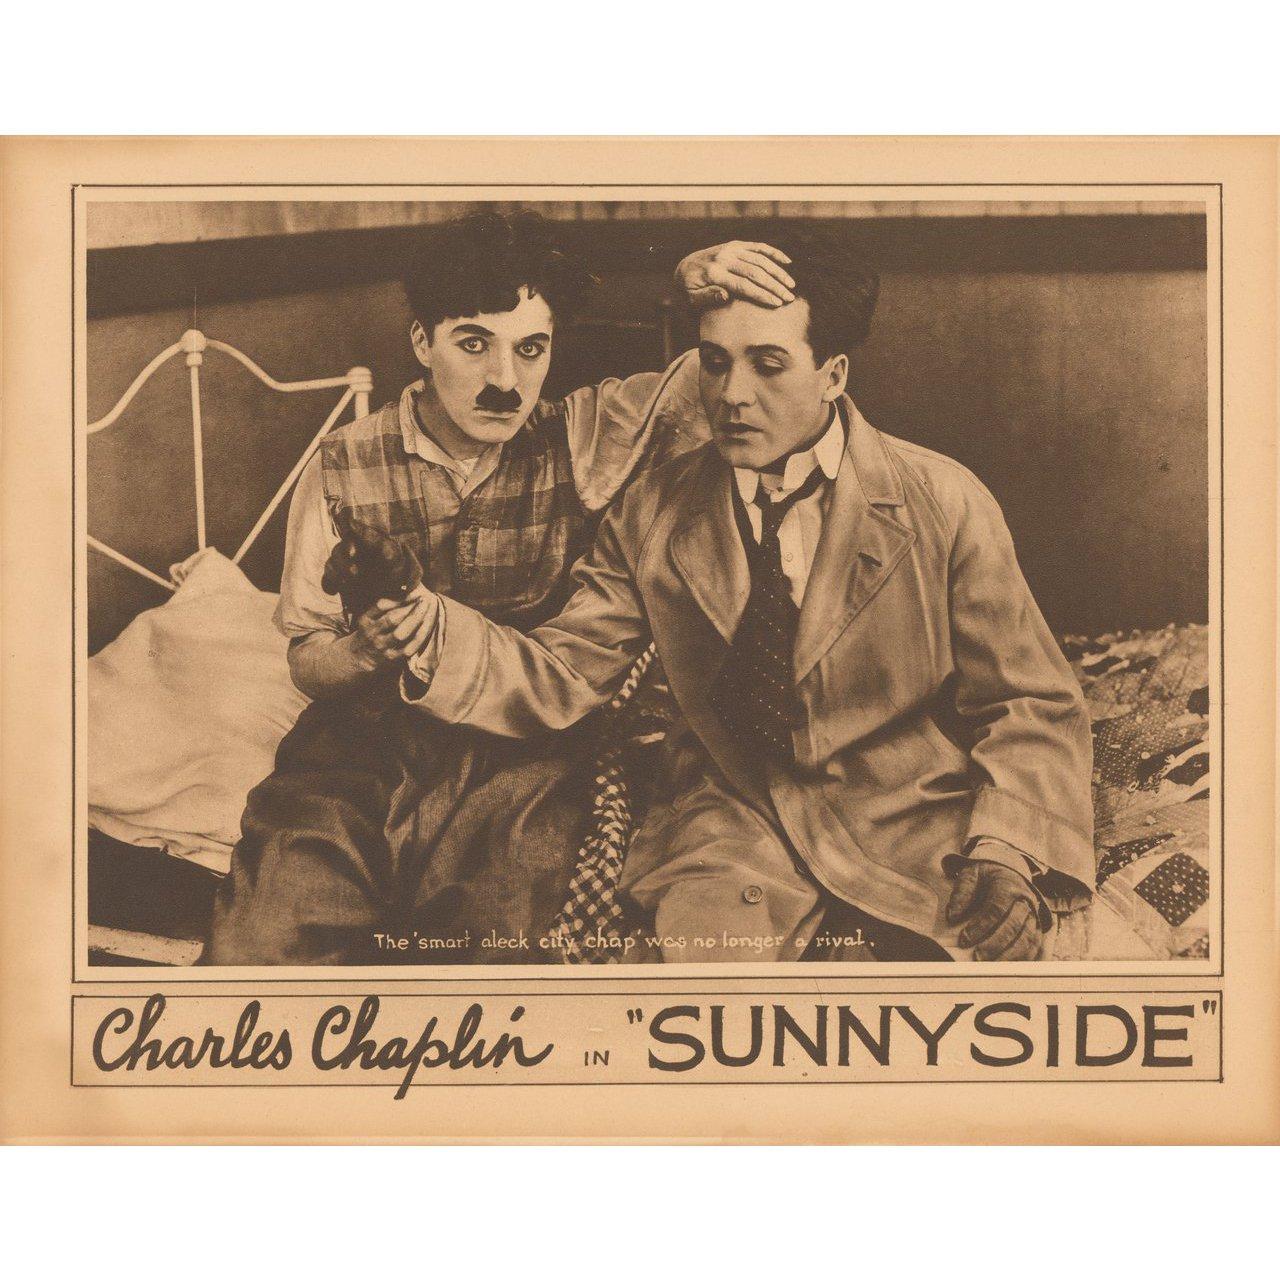 Original R1920's U.S. scene card for the film Sunnyside directed by Charles Chaplin with Charles Chaplin / Edna Purviance. Very Good-Fine condition. Please note: the size is stated in inches and the actual size can vary by an inch or more.